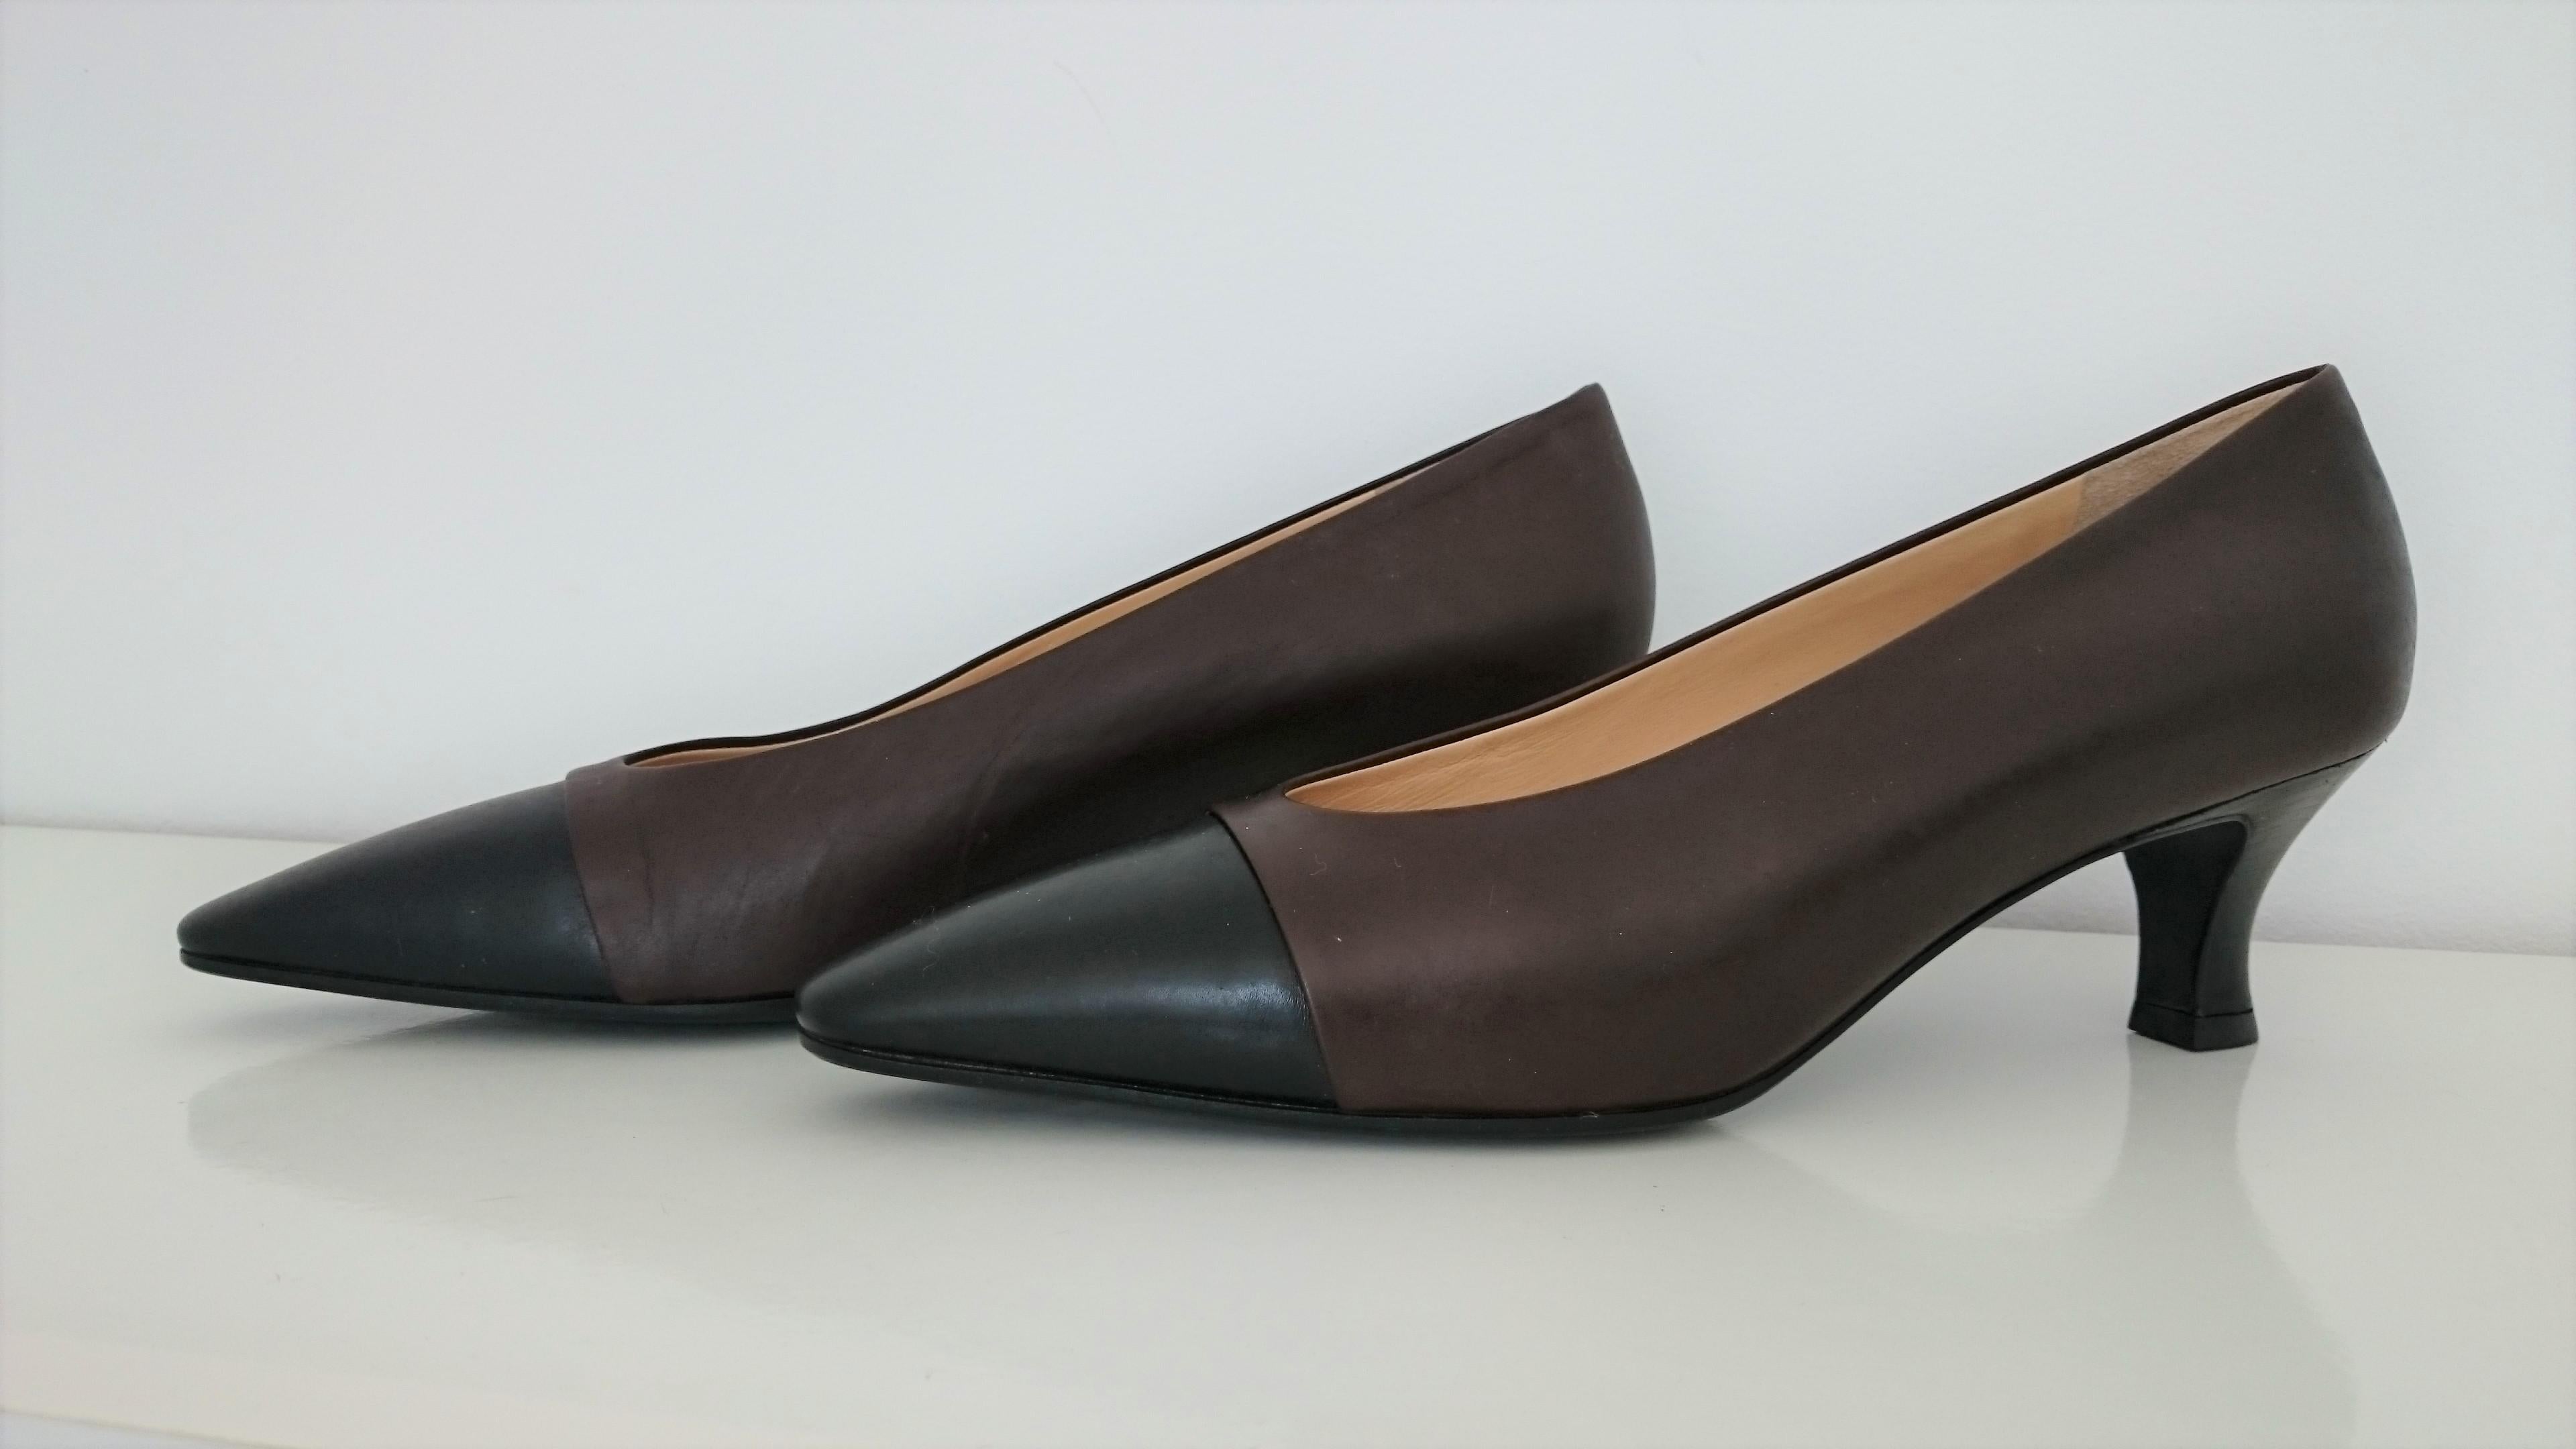 Prada Heels in Leather.
Colors: Brown and Black.
Great conditions.
Heel height: 5.2 cm
Size: 39 1/2 (EU)
Made in Italy